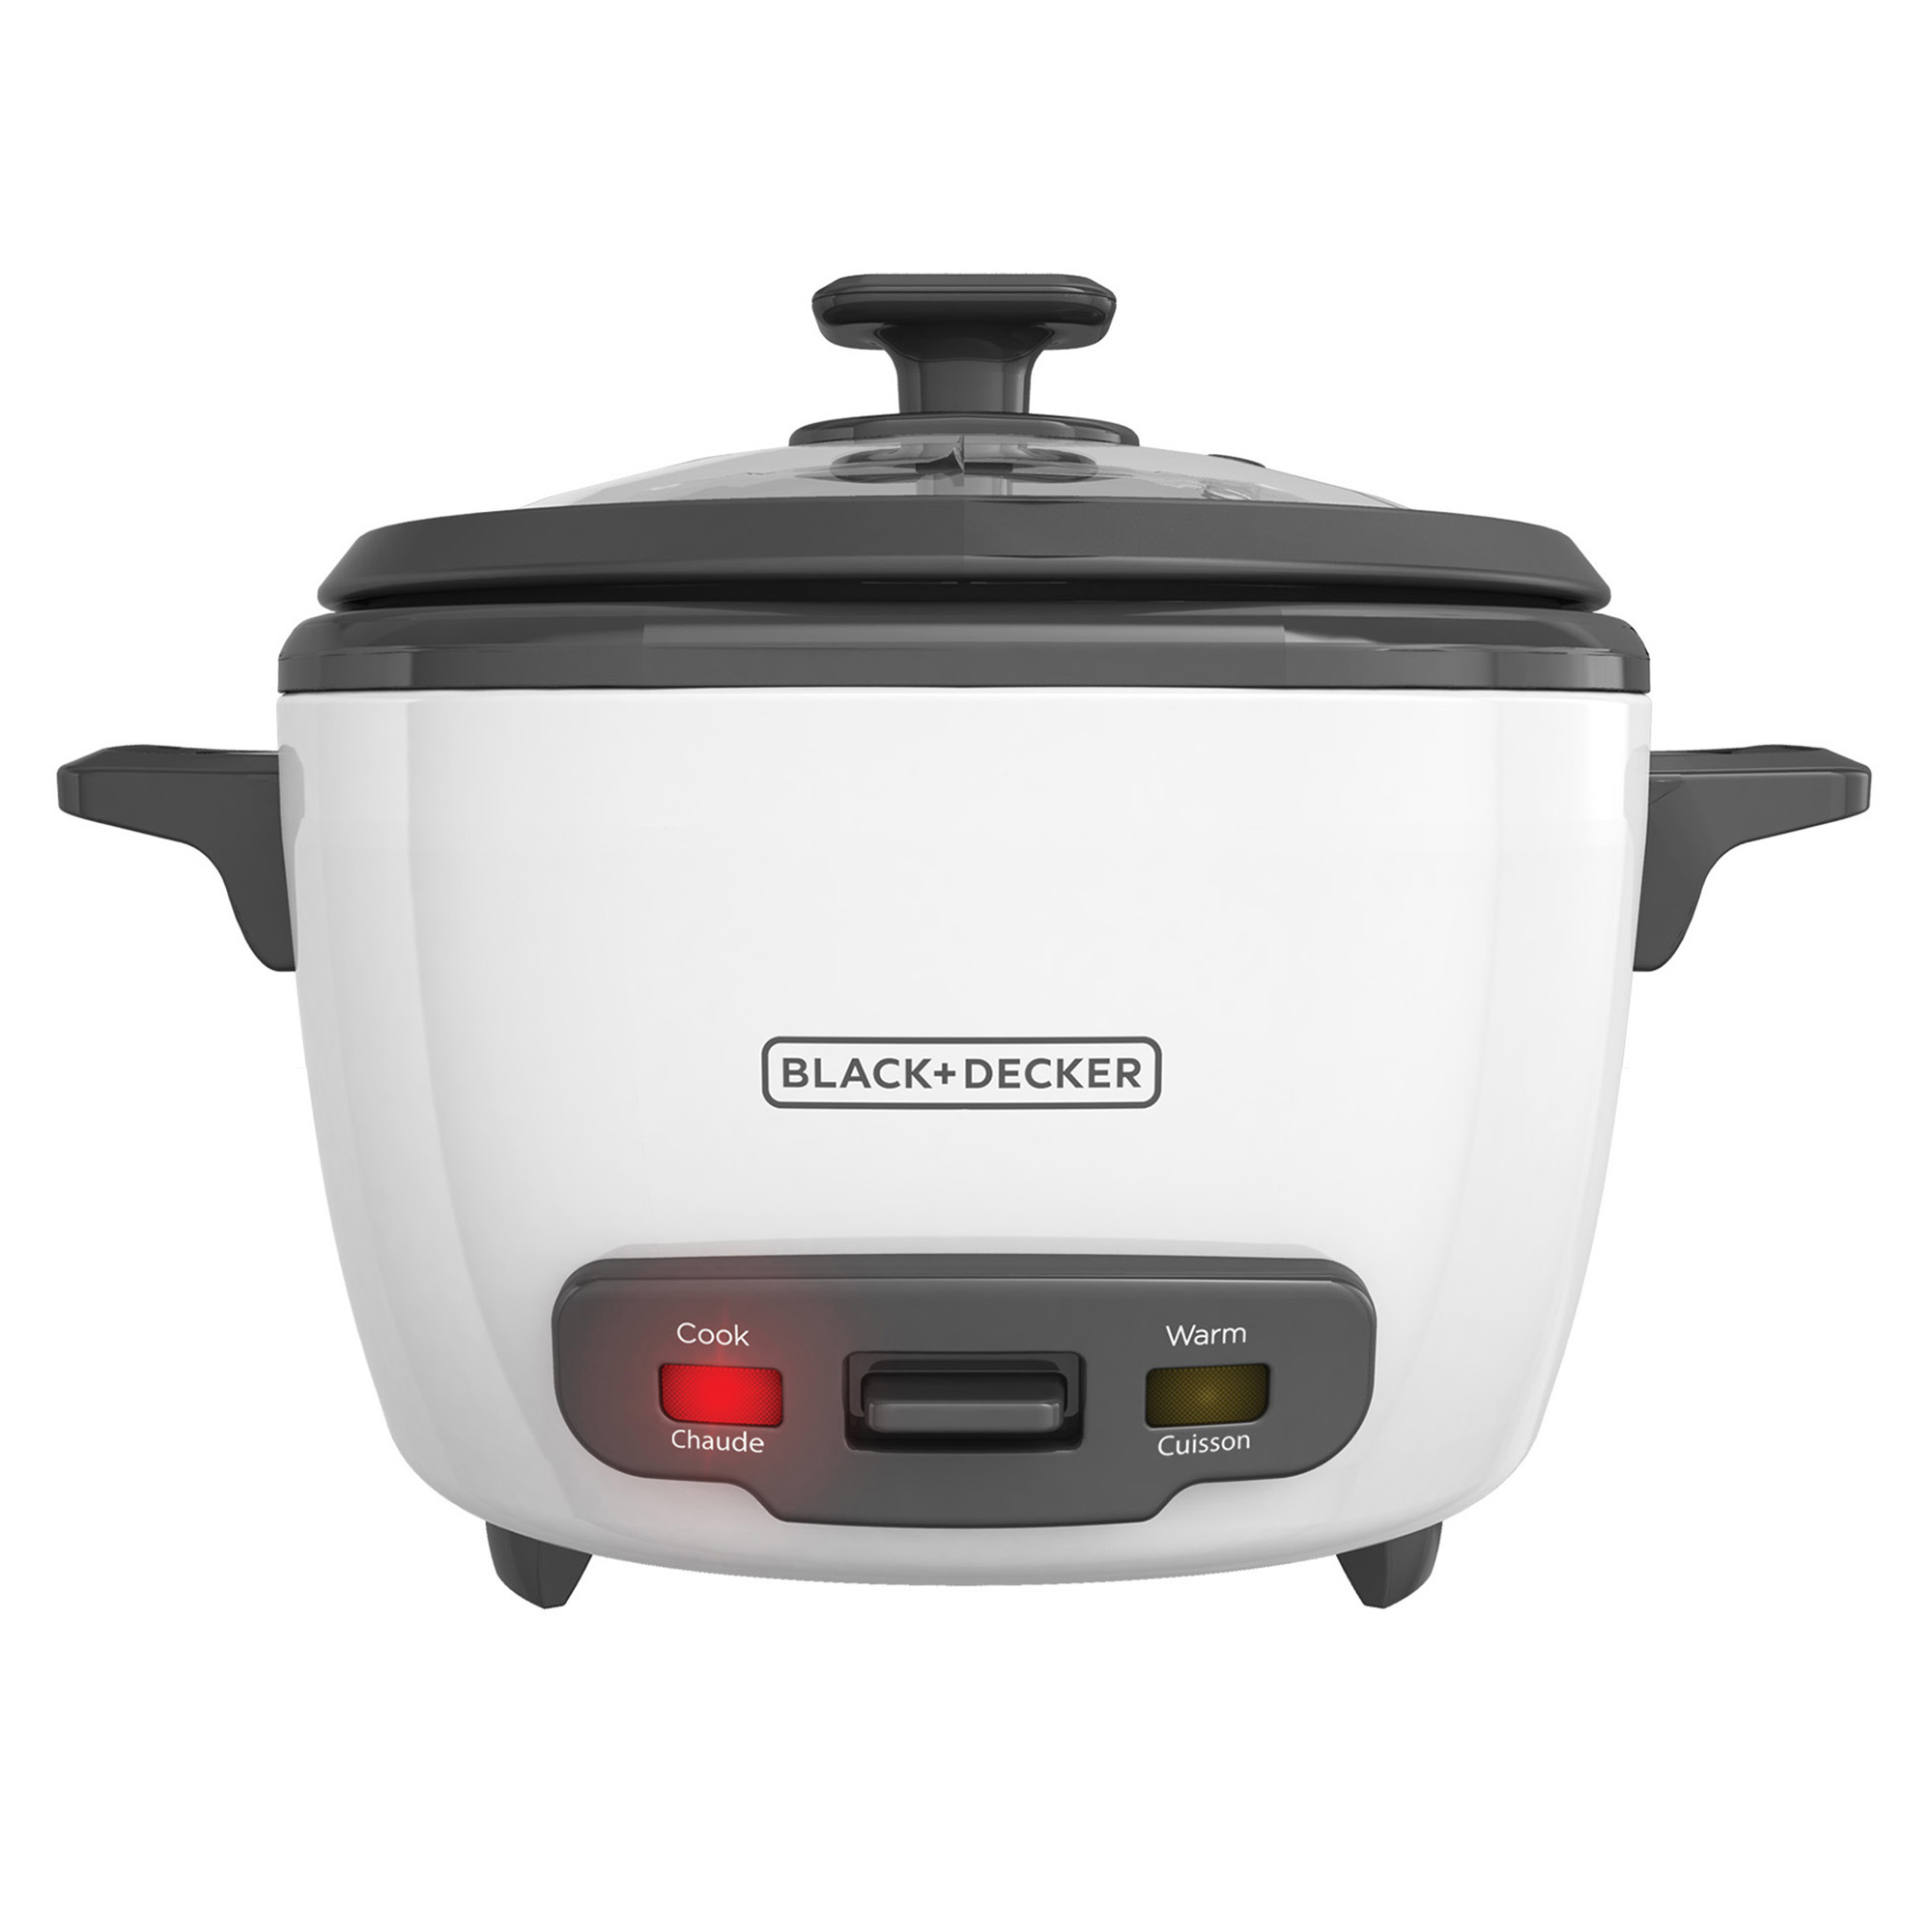 https://s7cdn.spectrumbrands.com/~/media/SmallAppliancesUS/Black%20and%20Decker/Product%20Page/cooking%20appliances/rice%20cookers%20and%20steamers/RC516/RC516Prd2_HR.jpg?h=2000&la=en&w=2000